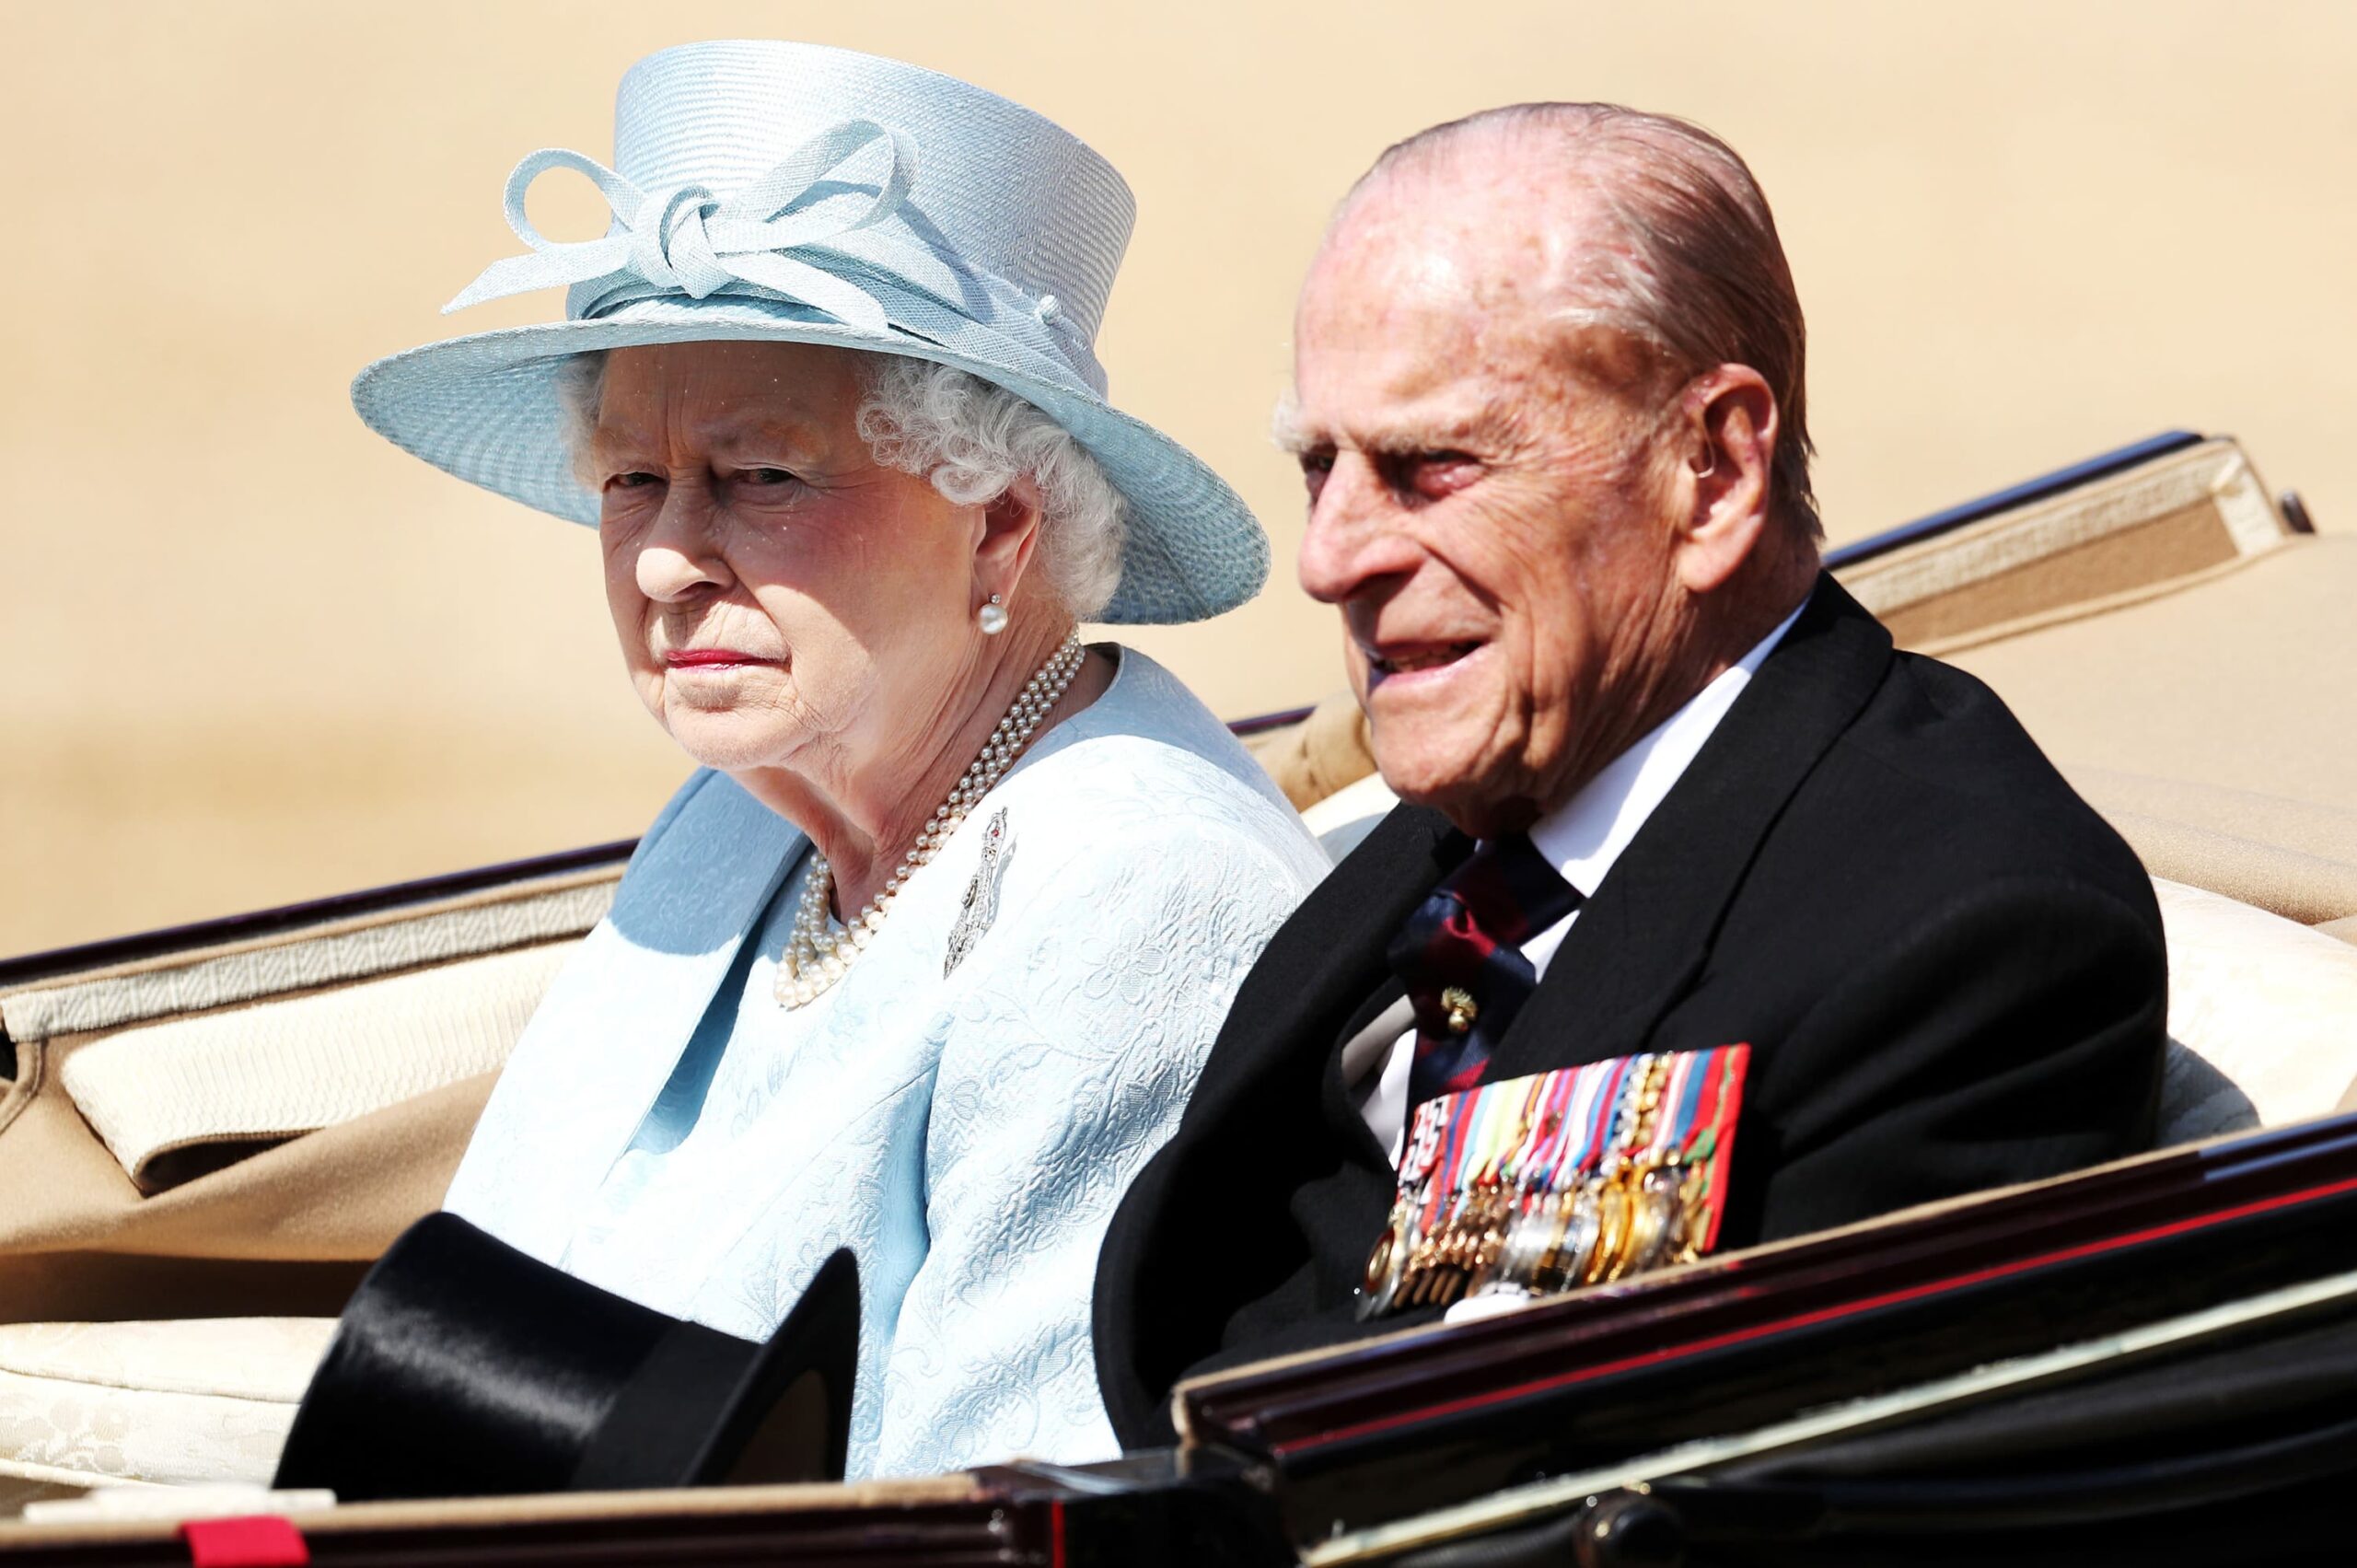 The queen of england with the duke of edinburgh scaled